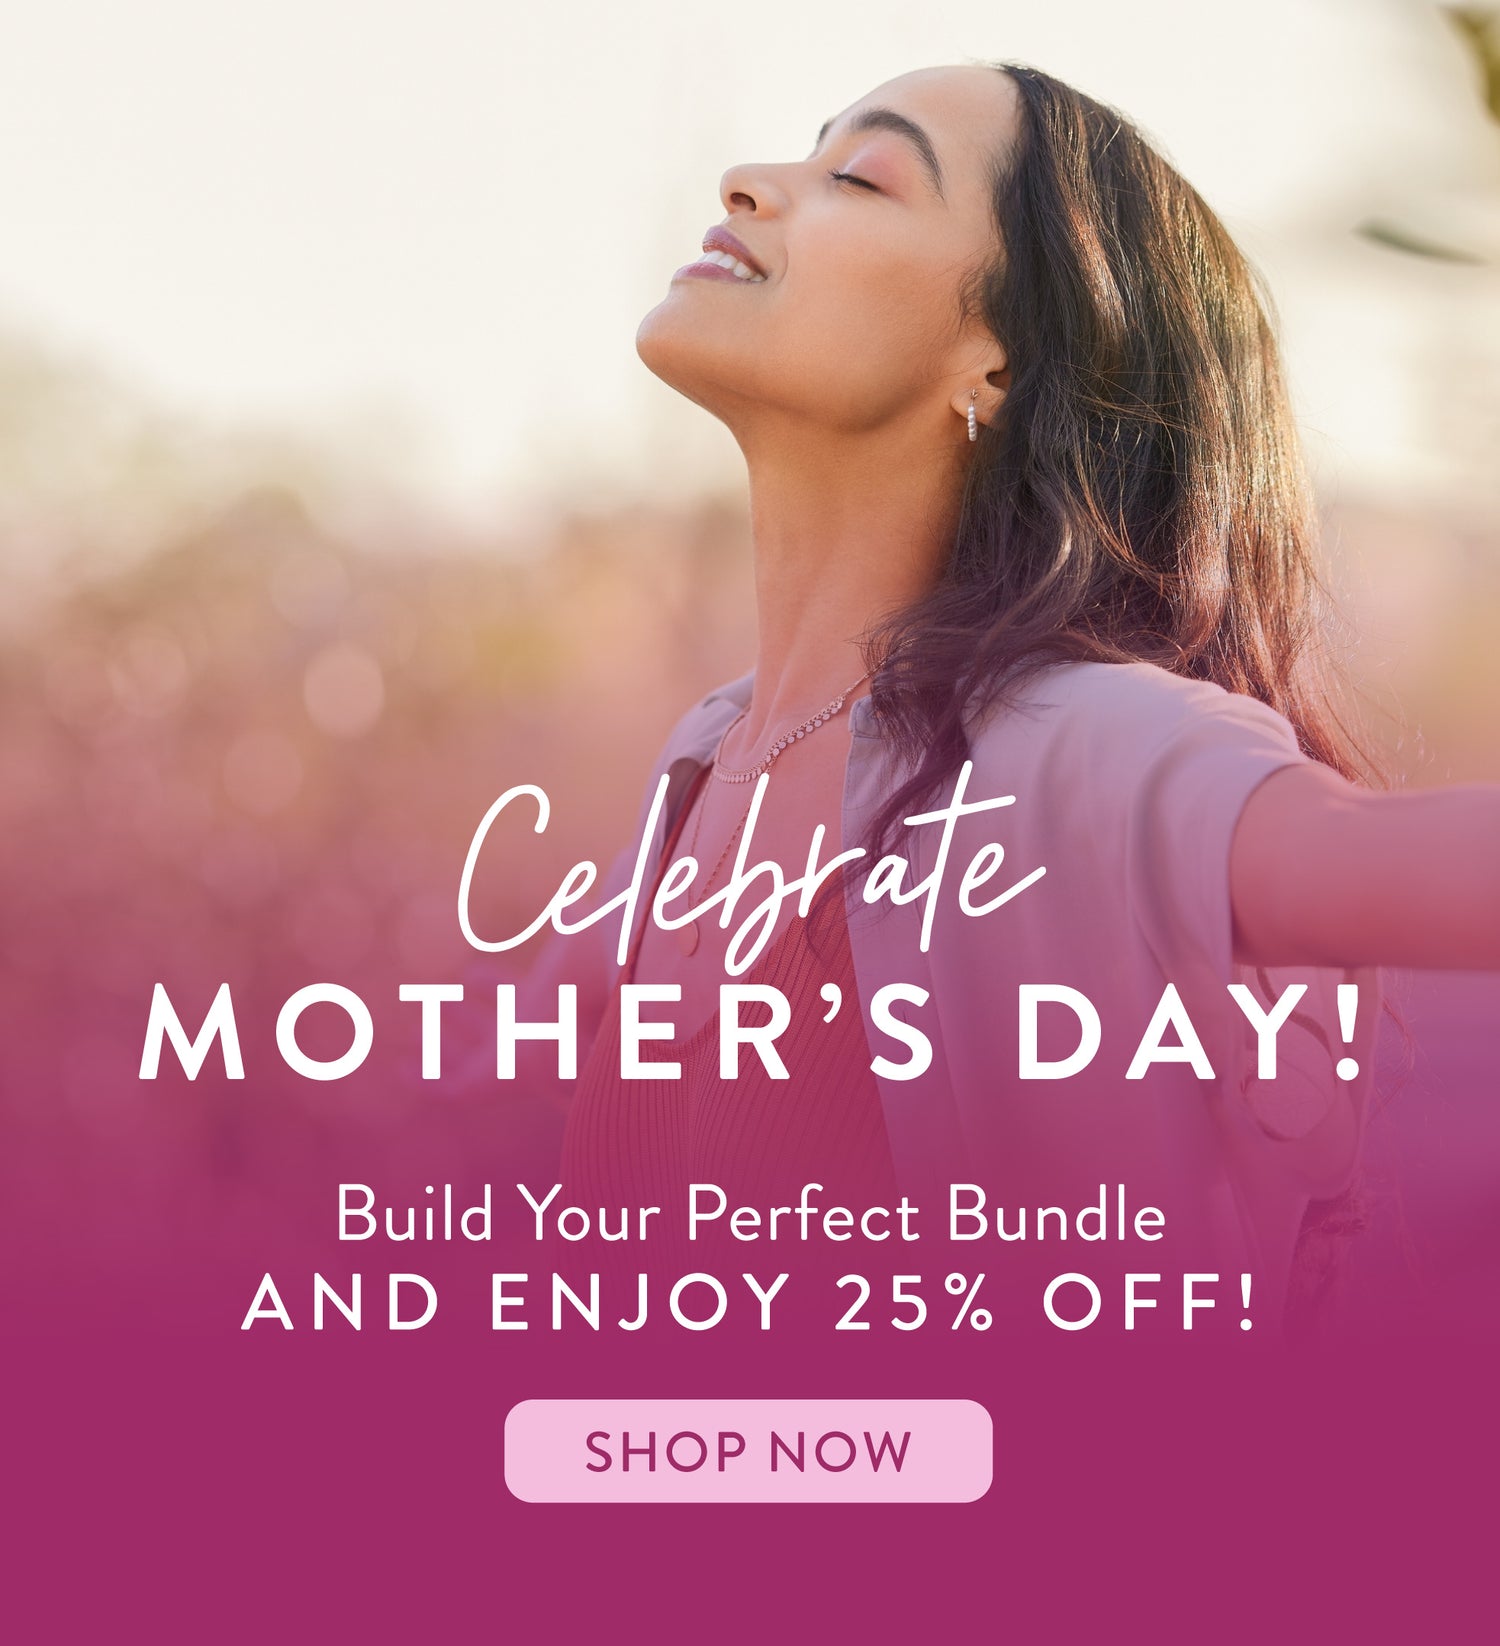 Celebrate Mother's Day! Build your perfect bundle and enjoy 25% off - Shop Now